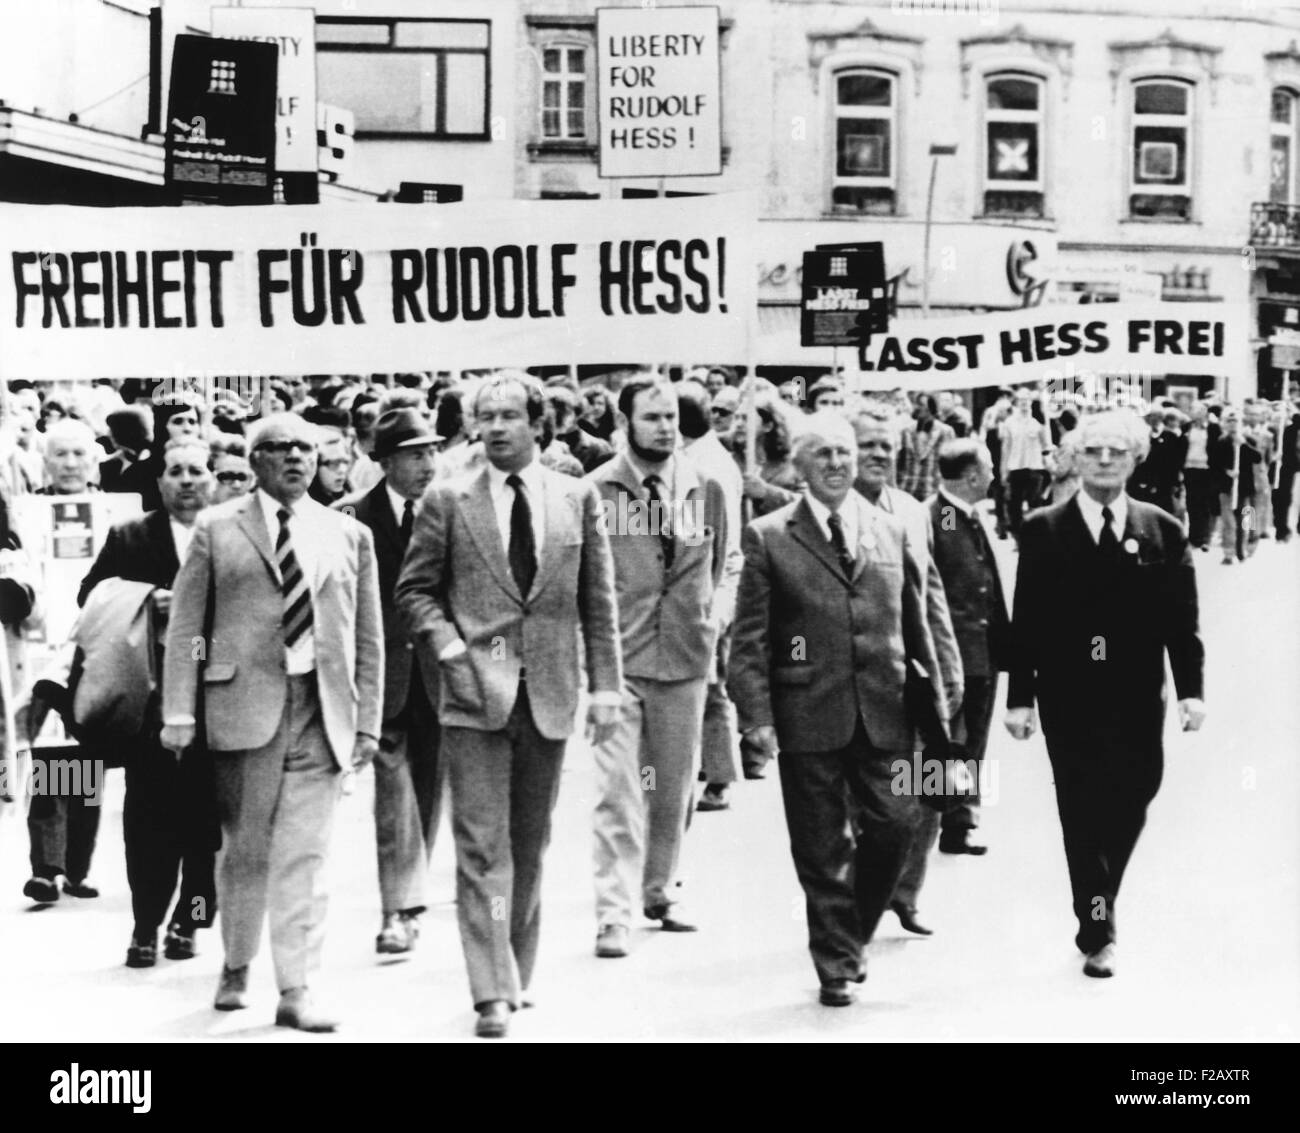 Wolf Ruediger Hess (hand in pocket), son of Nazi war criminal, Rudolf Hess, leads demonstration. In Bonn, West Germany, 2000 protestors demanded the release of Hitler's one time deputy from Spandau Prison. May 6, 1973. (CSU 2015 9 962) Stock Photo